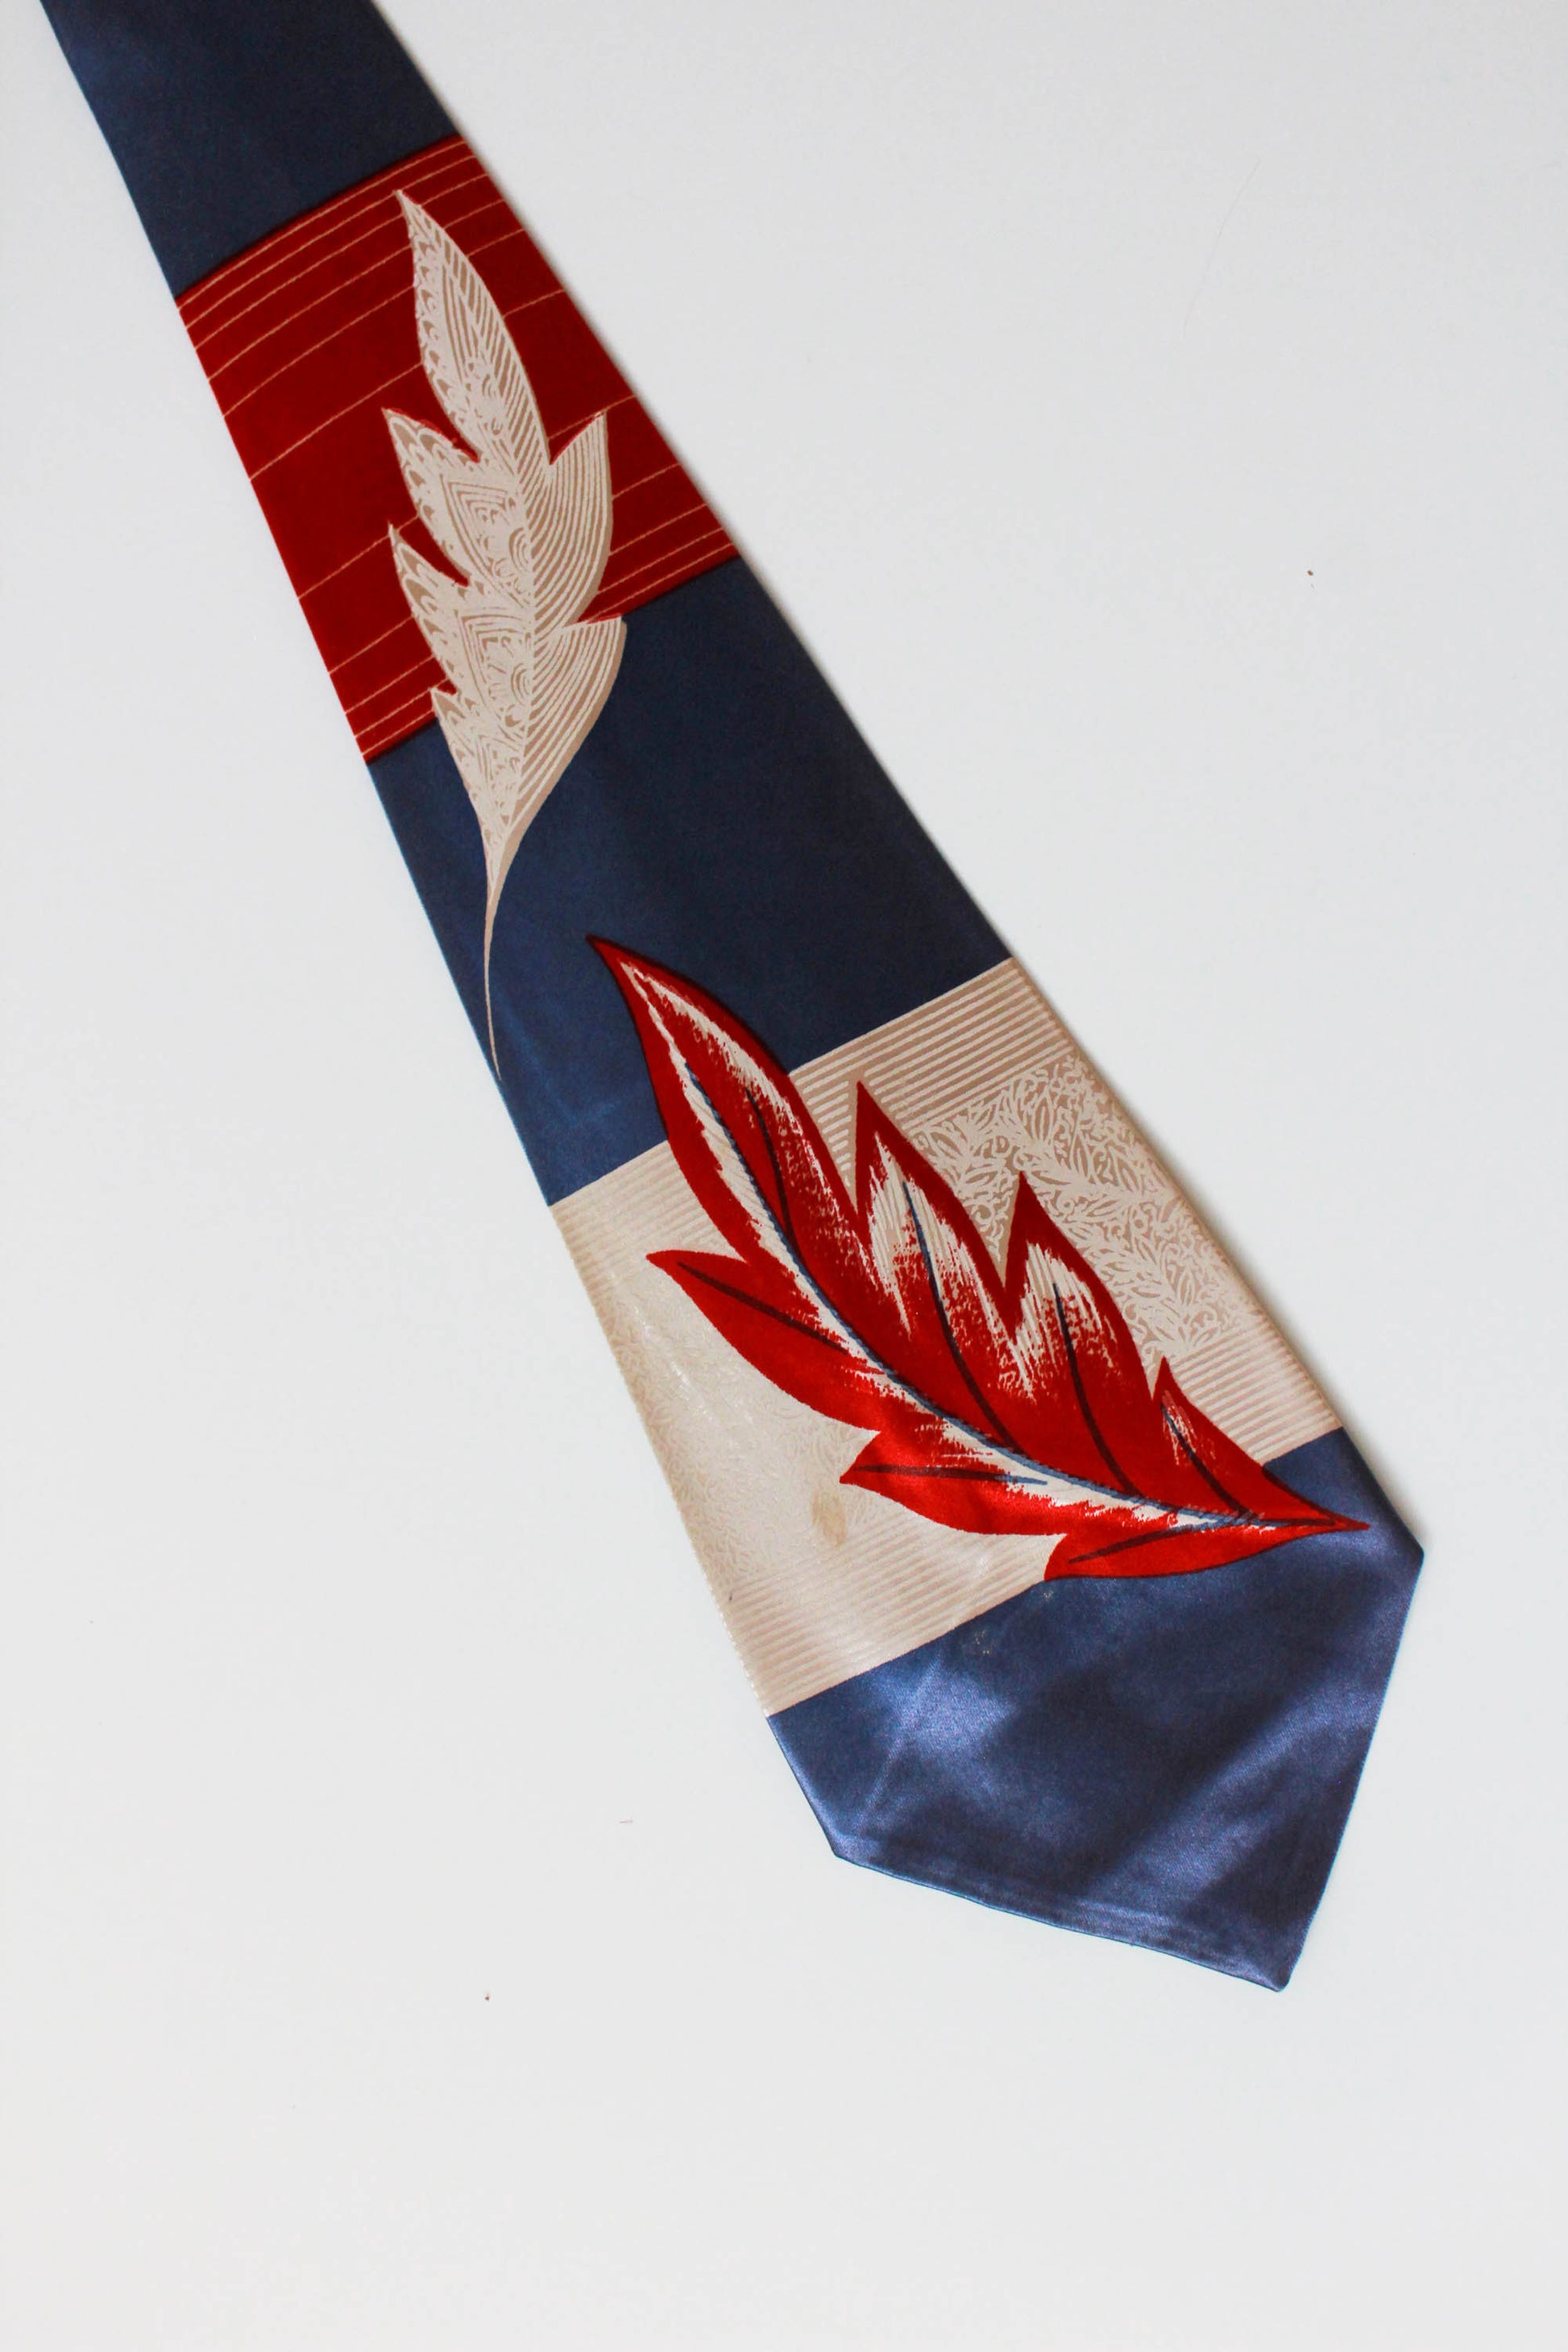 1940s rayon necktie blue, beige and red with large falling leaf pattern, by fashion craft, 1940s wide tongue bold look vintage tie